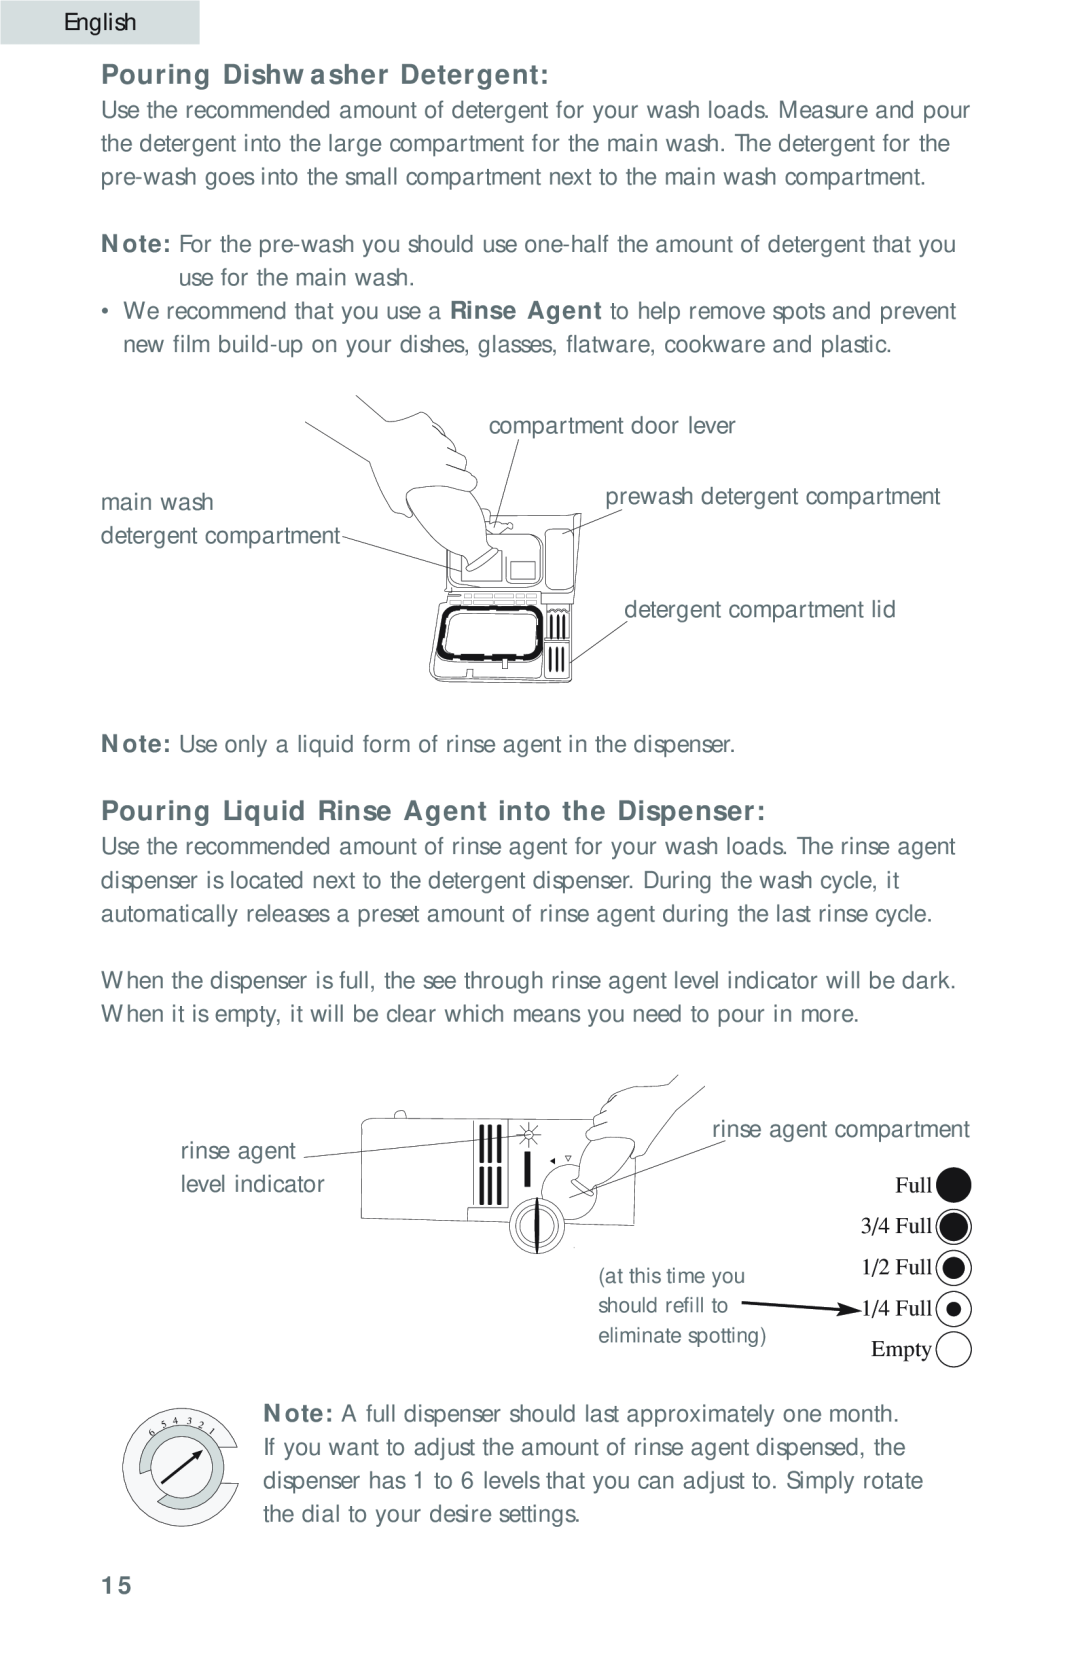 Haier HDB18EB user manual Pouring Dishwasher Detergent, Pouring Liquid Rinse Agent into the Dispenser 